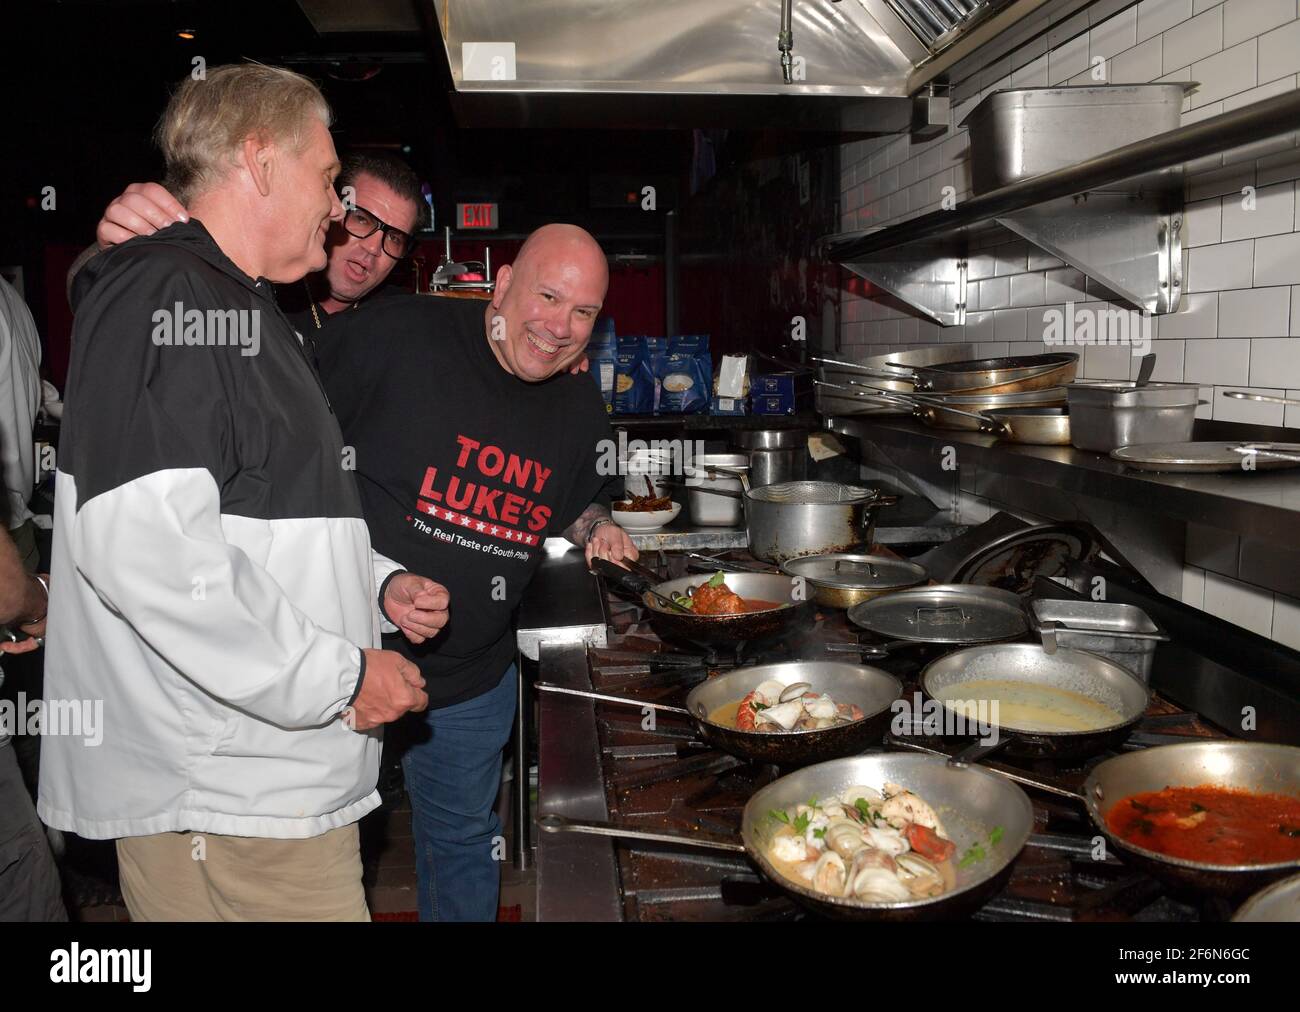 FORT LAUDERDALE; FL - APRIL 01: (NO SALES TO NEW YORK POST) (EXCLUSIVE COVERAGE) Gravesend Actors William Forsyth, Bruce Soscia, Tony Luke Jr of  Tony Luke's Cheese Steak and comedian Vic Dibitetto went into the kitchen to cook with fellow Actor, cook and Owner Steve Martorano The “Godfather of Italian-American cooking” on April 1, 2021 At Cafe Martorano in Fort Lauderdale, Florida  People:  William Forsyth, Bruce Soscia,Tony Luke Credit: Storms Media / MediaPunch Stock Photo